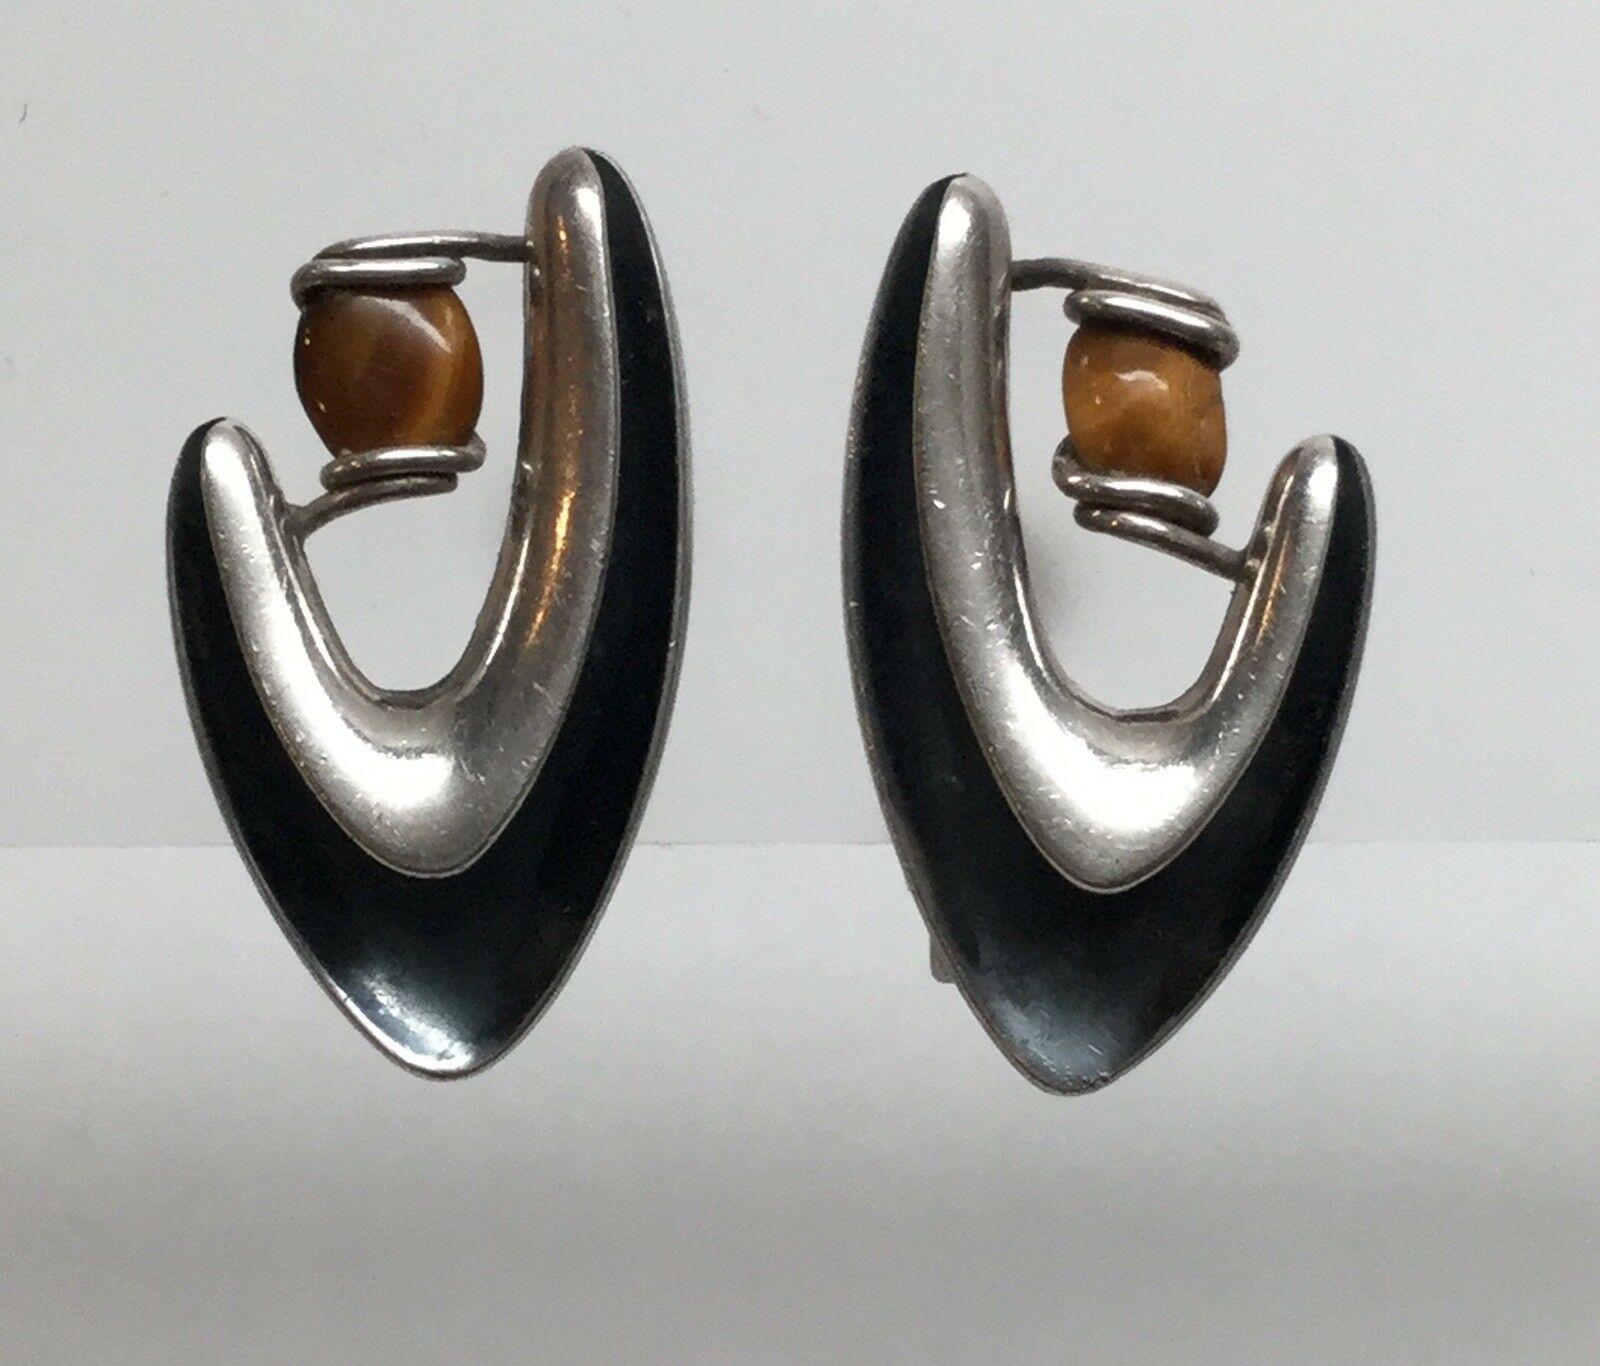 Sigi Pineda Taxco sterling silver boomerang screw back earrings with Tiger's eye #34.

Marked: Sigi, TASCO, Eagle 3, STERLING SILVER TAXCO (in circle), 34.

Measures: 1 1/4